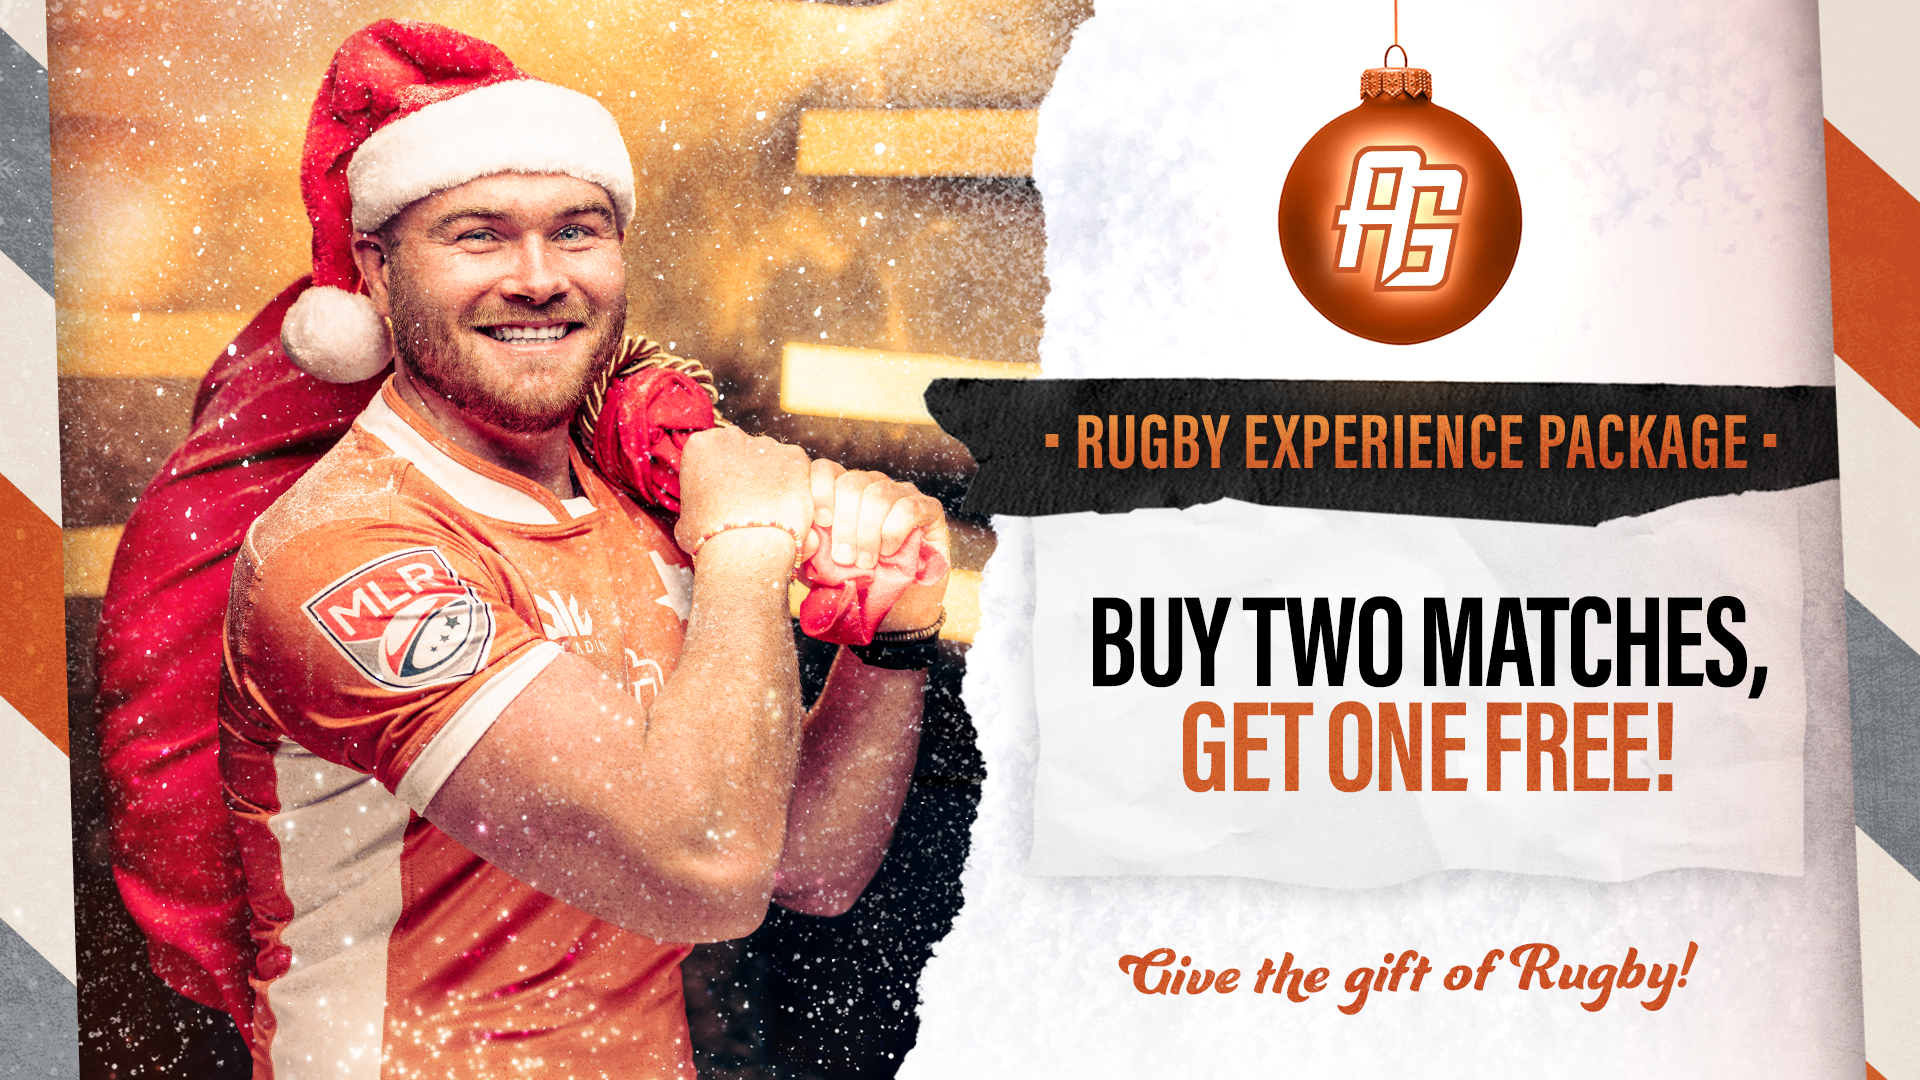 Give The Gift of Rugby With The AG Rugby Experience Package